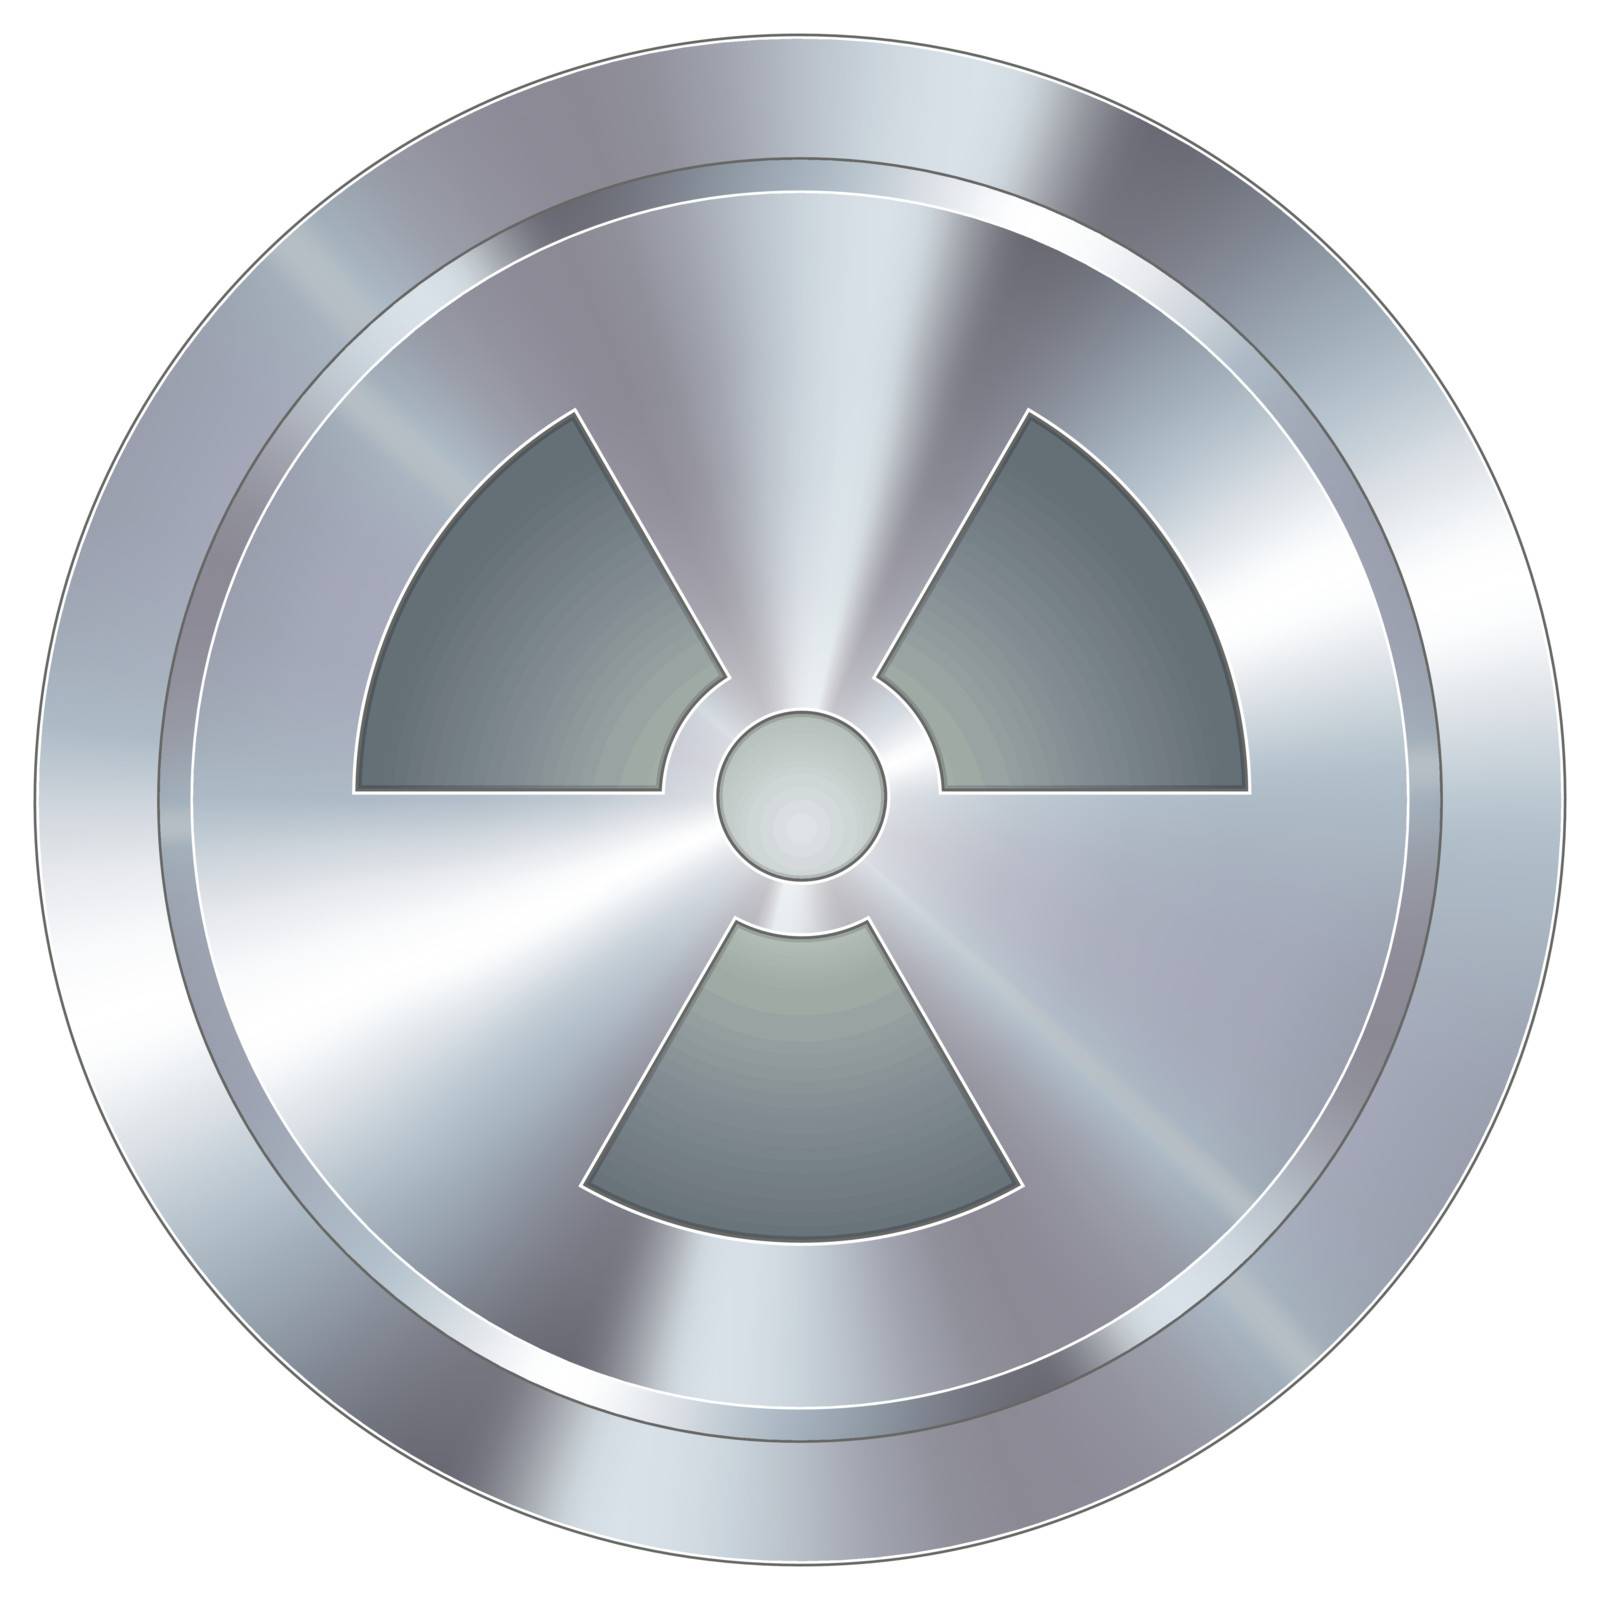 Radiation warning industrial button by lhfgraphics